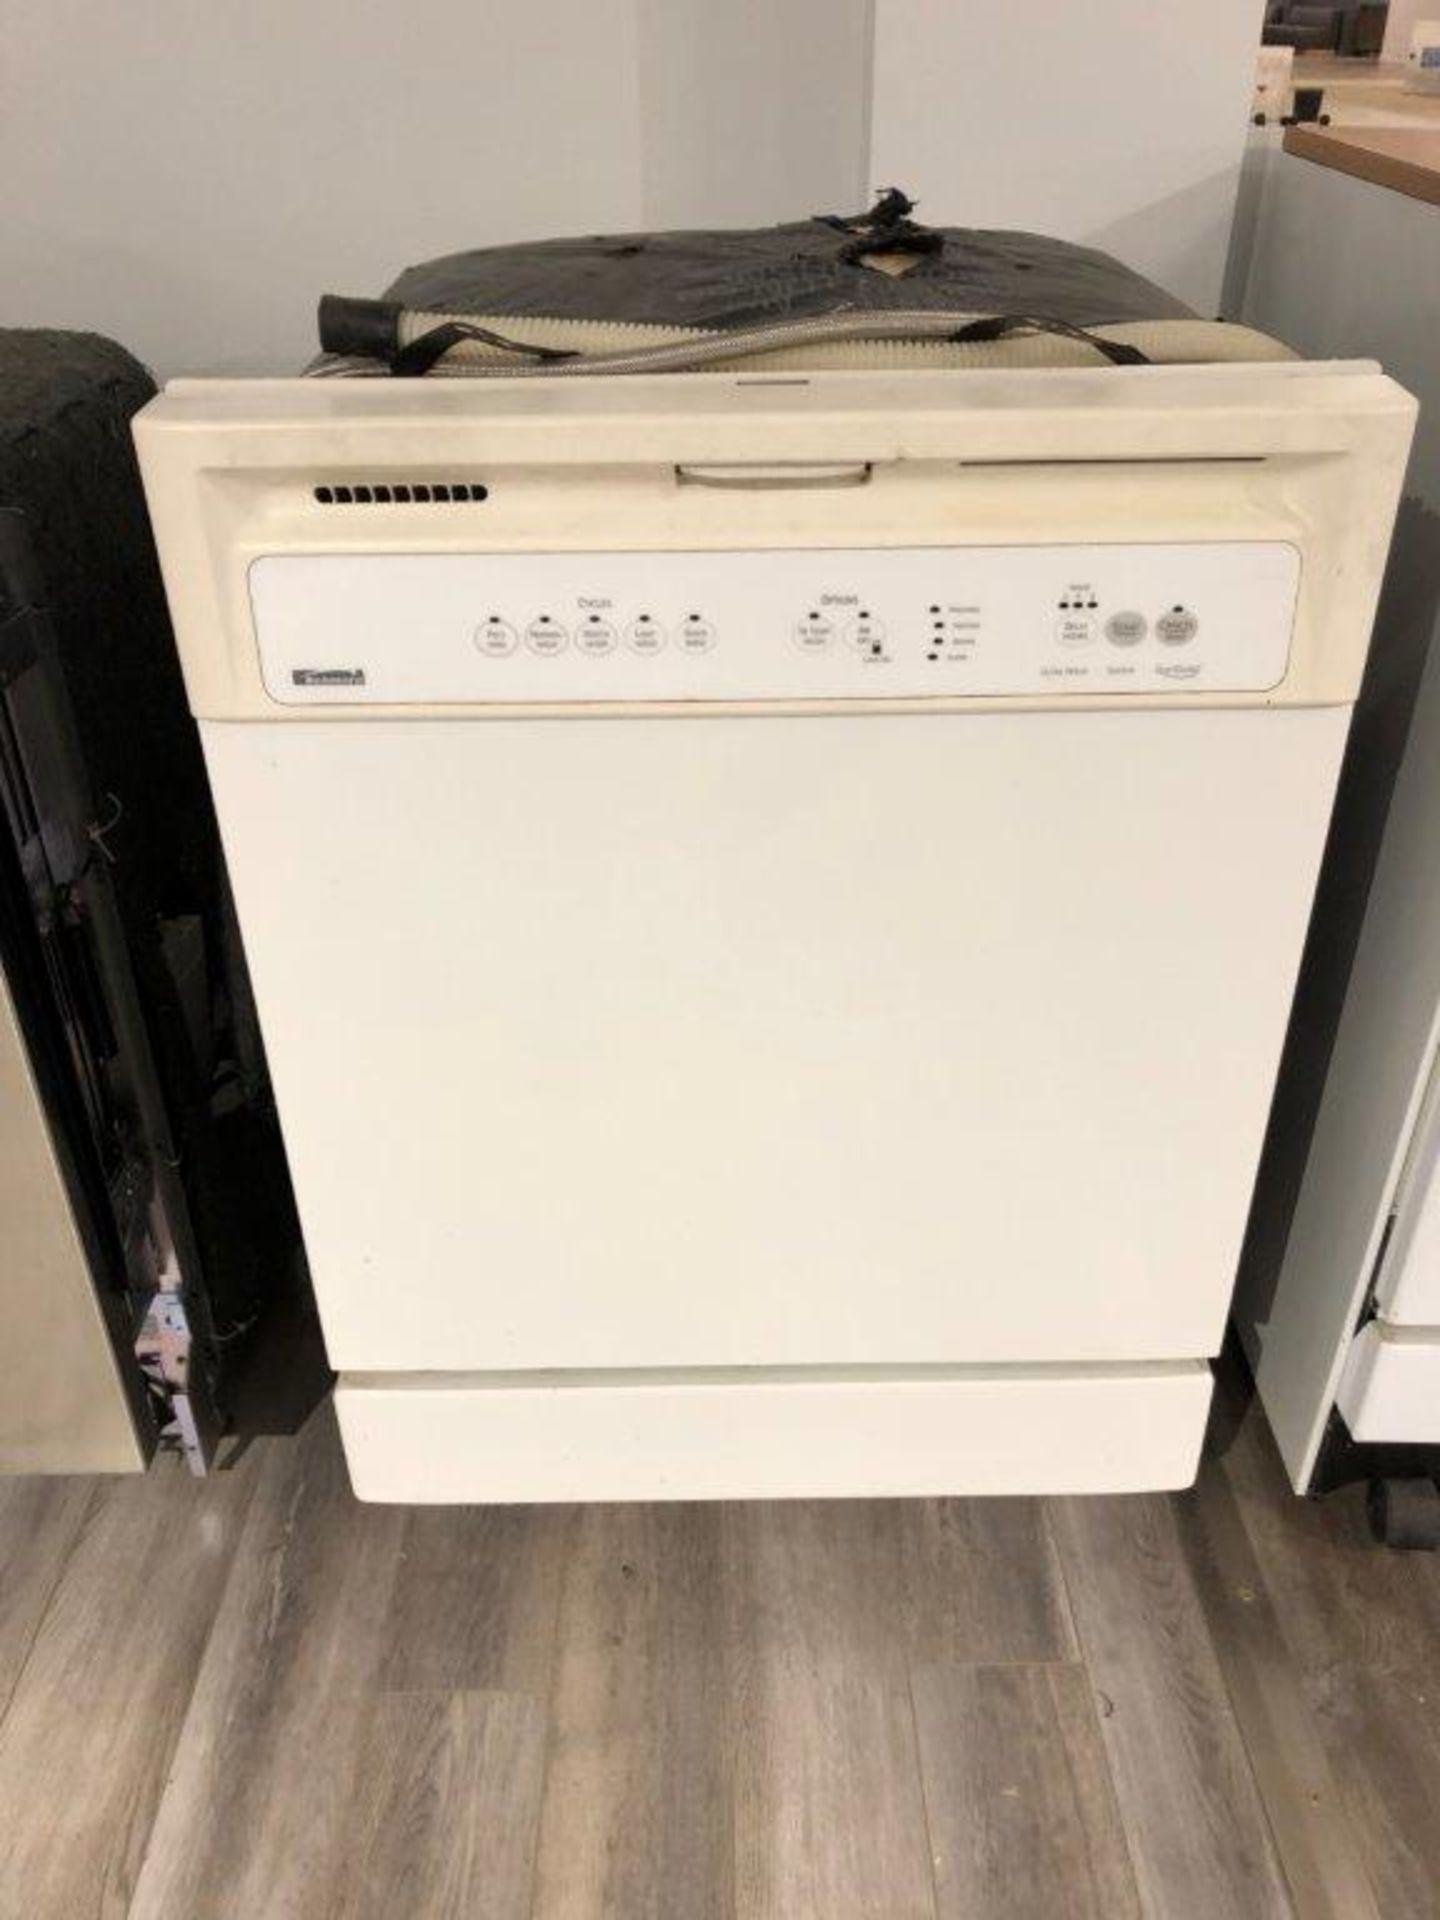 Assorted dishwashers & compact chest freezer, TEL QUEL,AS IS,MAY REQUIRE SERVICE & PARTS, 3 pcs